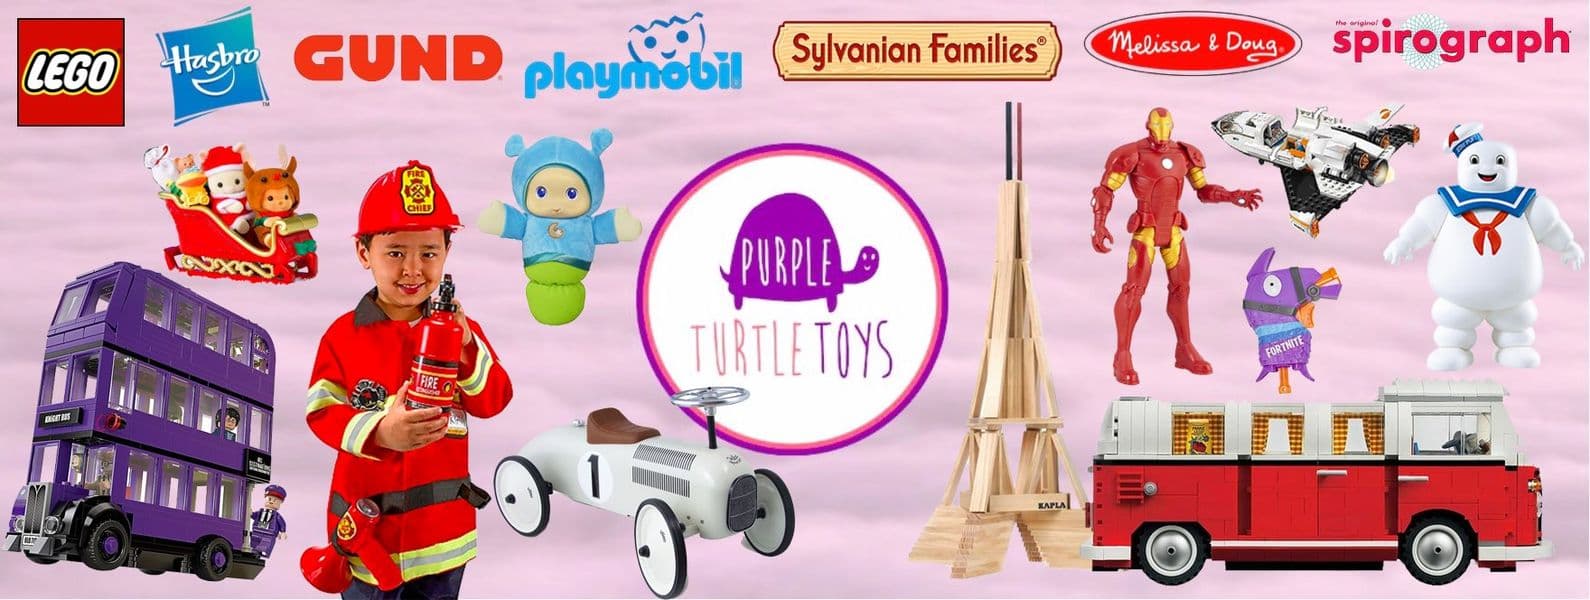 All Purple Turtle Toys Promo Codes & Coupons